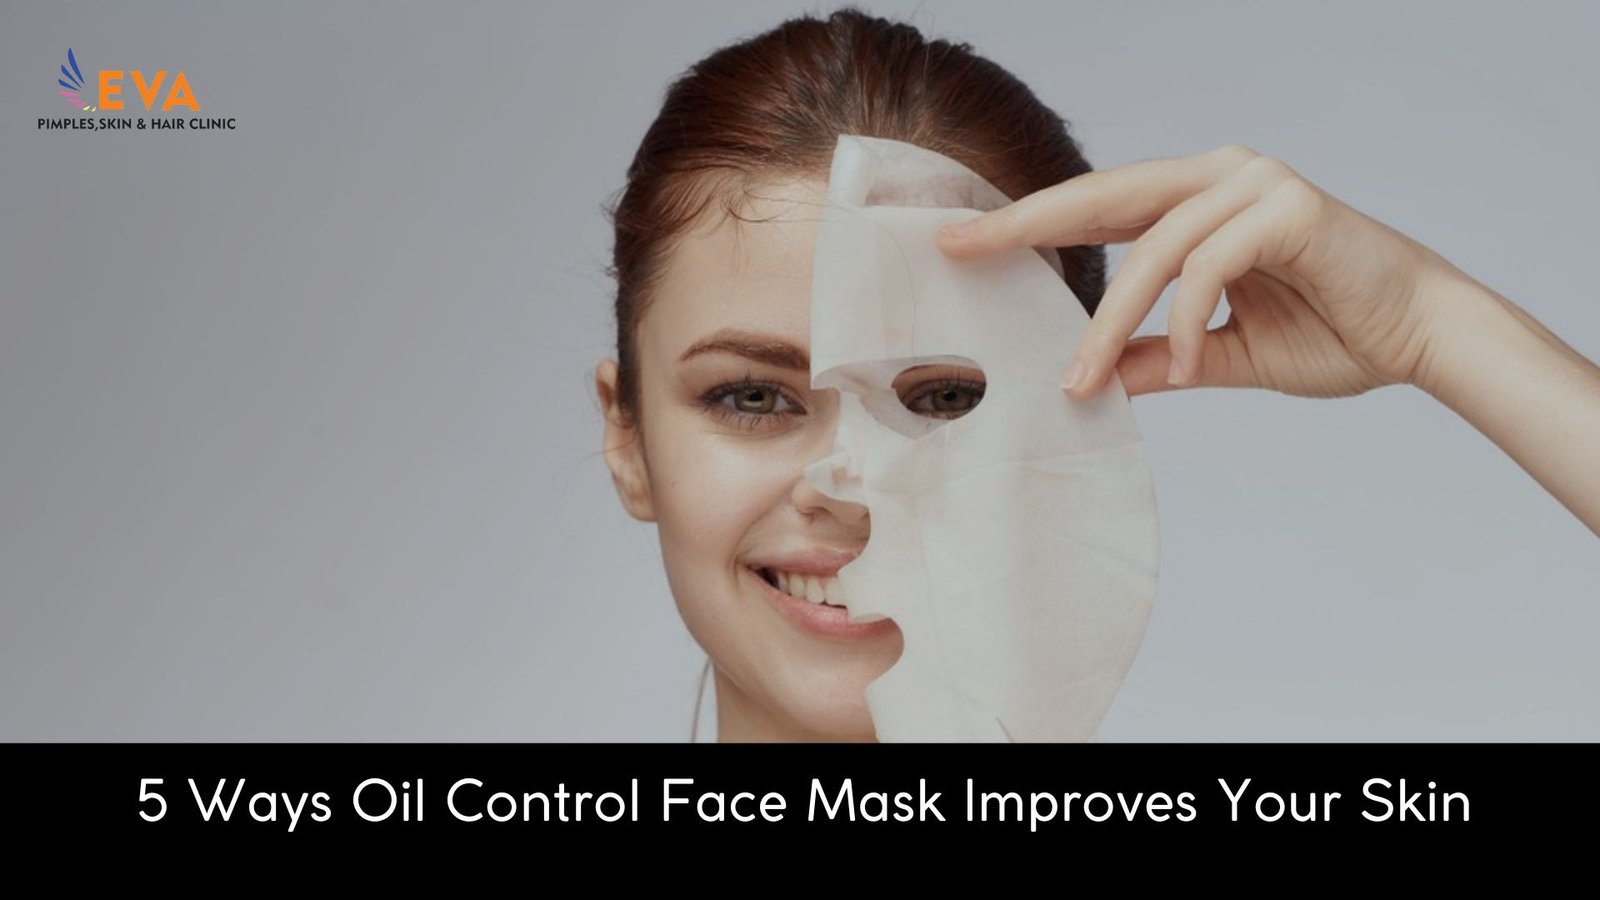 5-Ways-Oil-Control-Face-Mask-Improves-Your-Skin-Banner